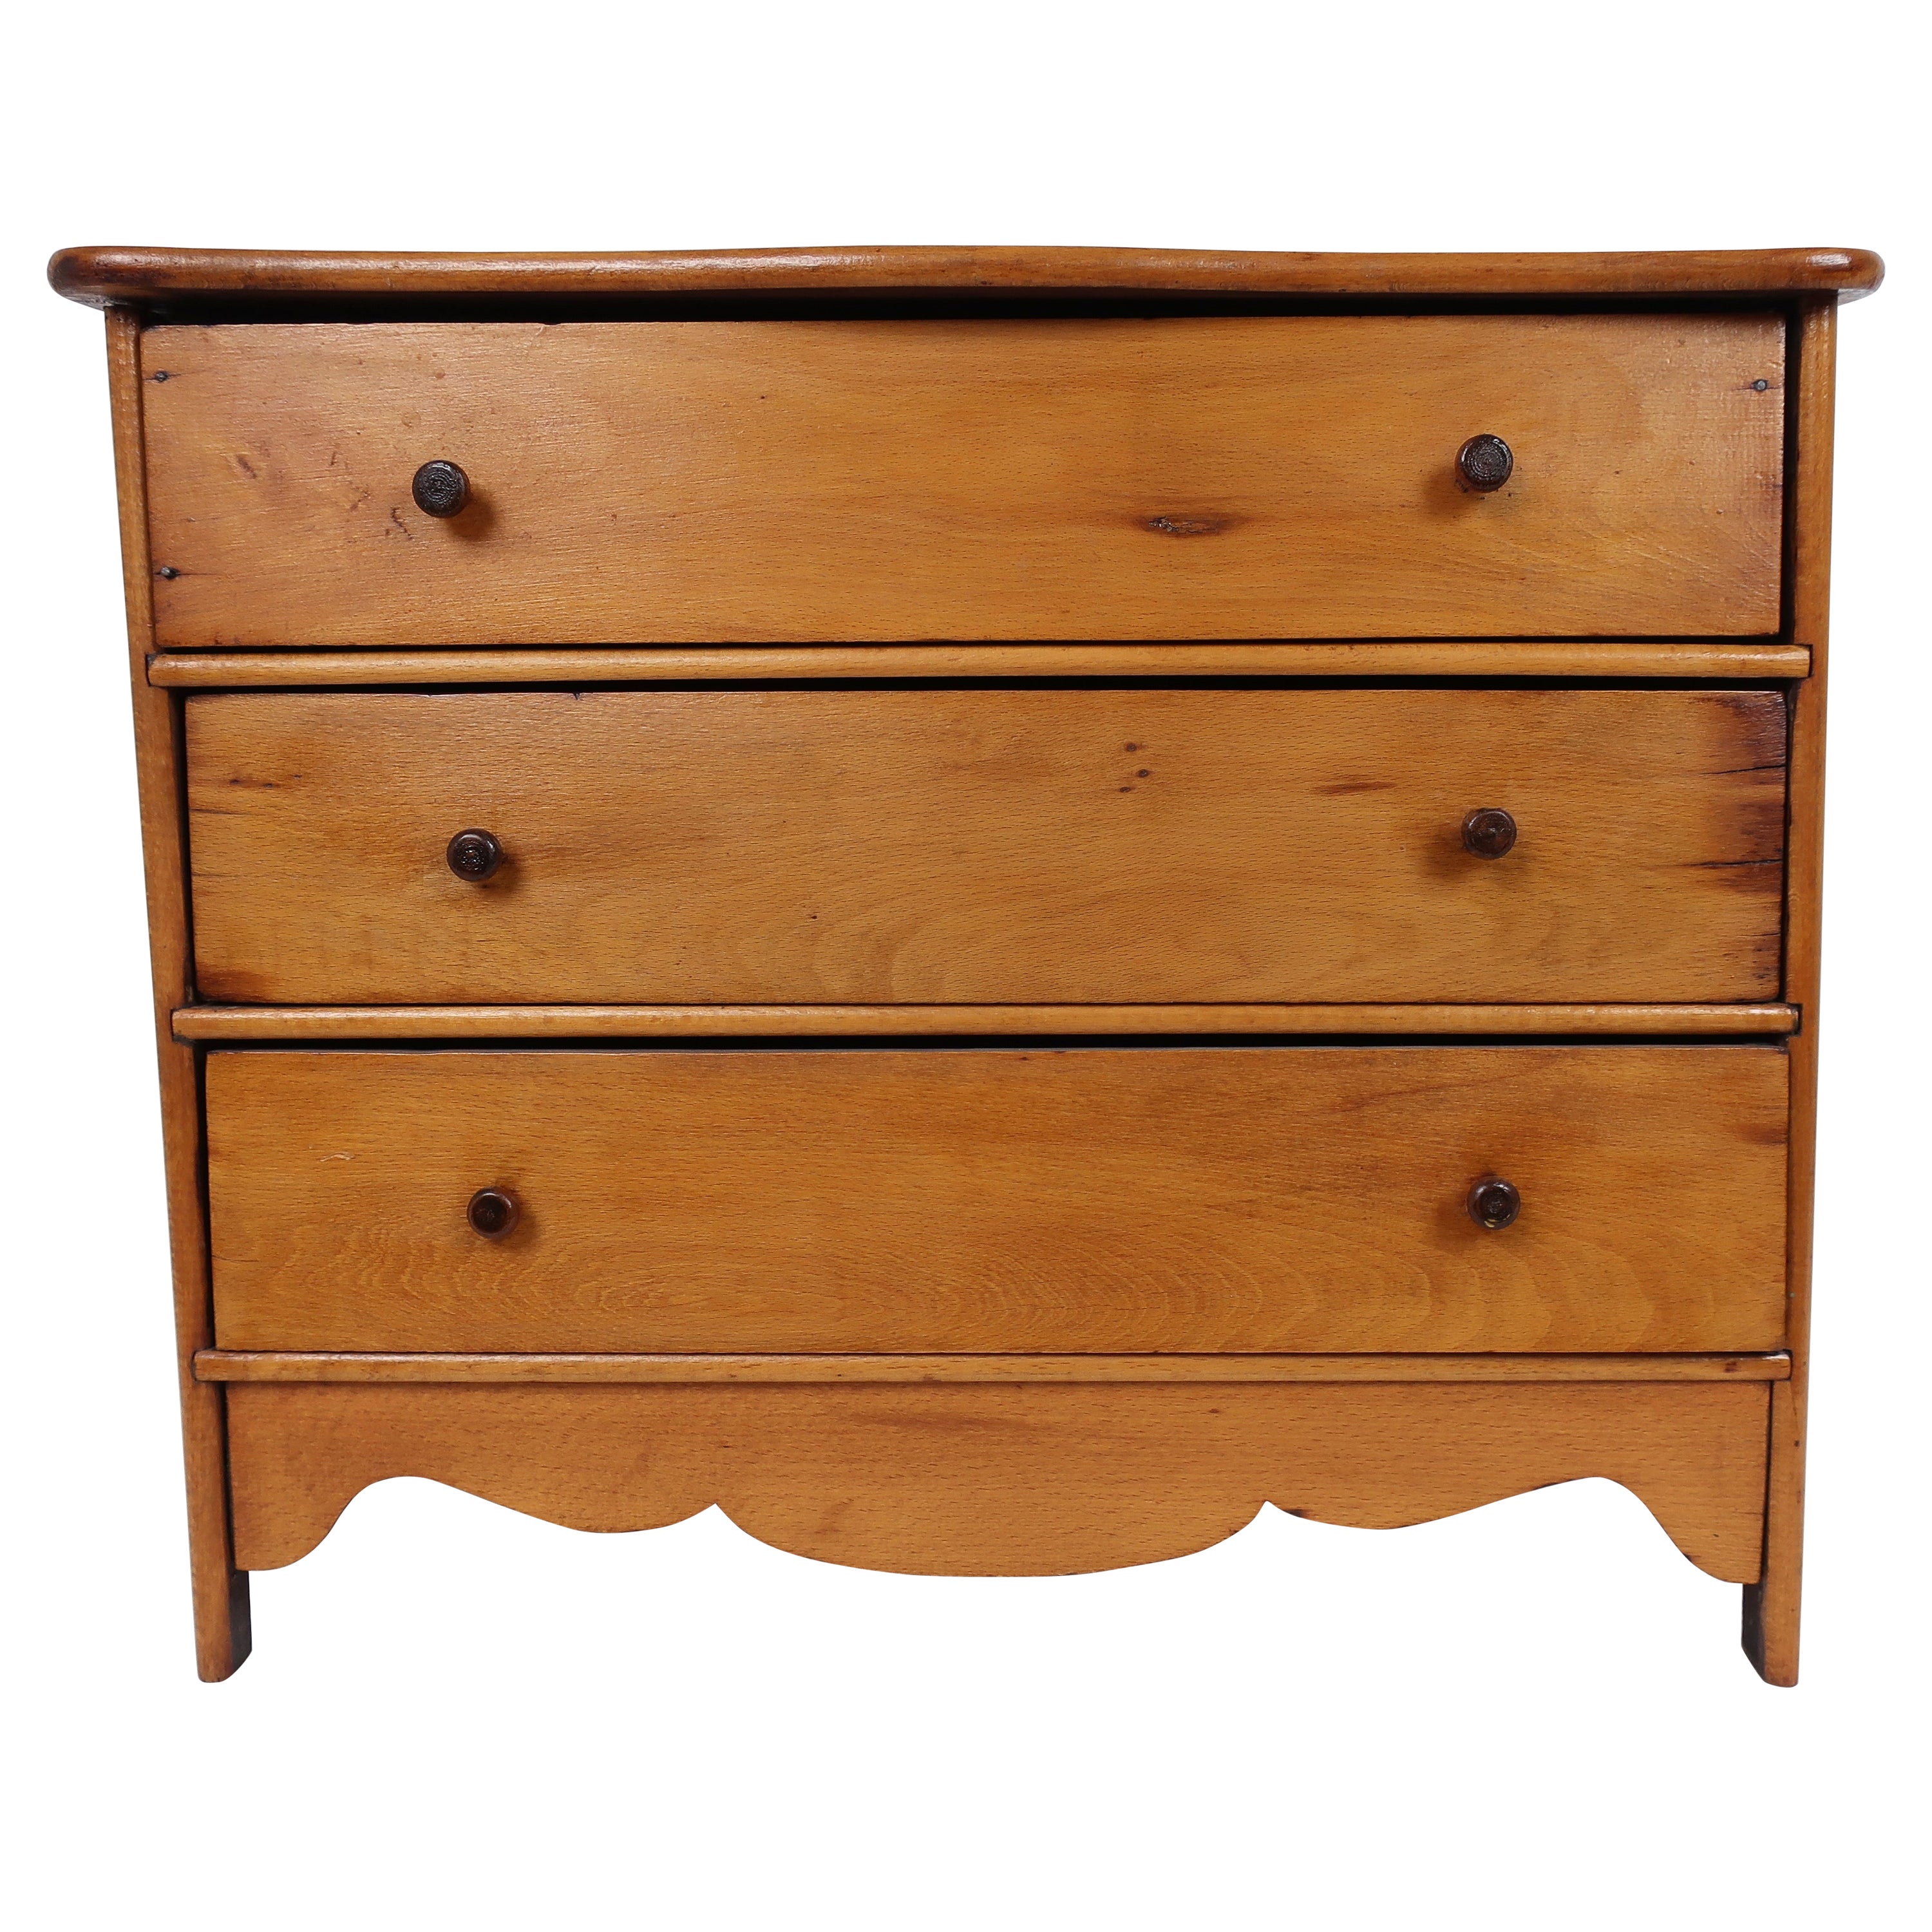 American Miniature Sample Chest of Drawers